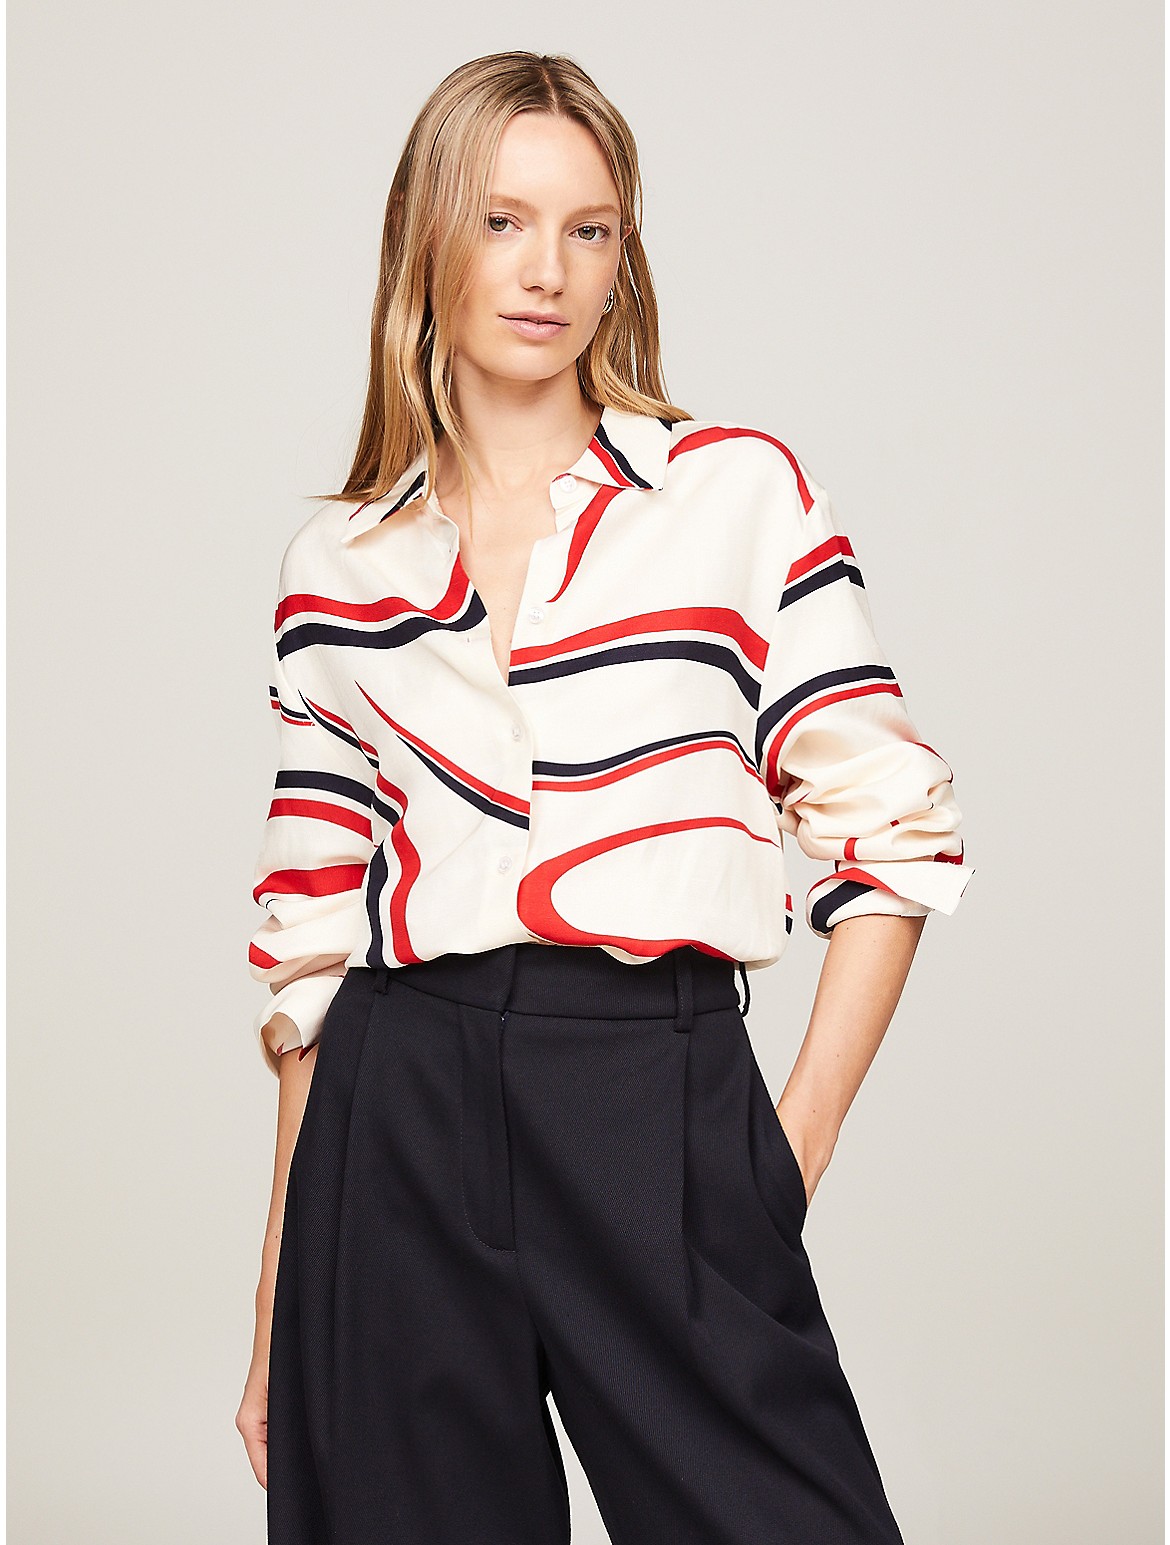 Tommy Hilfiger Women's Relaxed Fit Ribbon Print Shirt